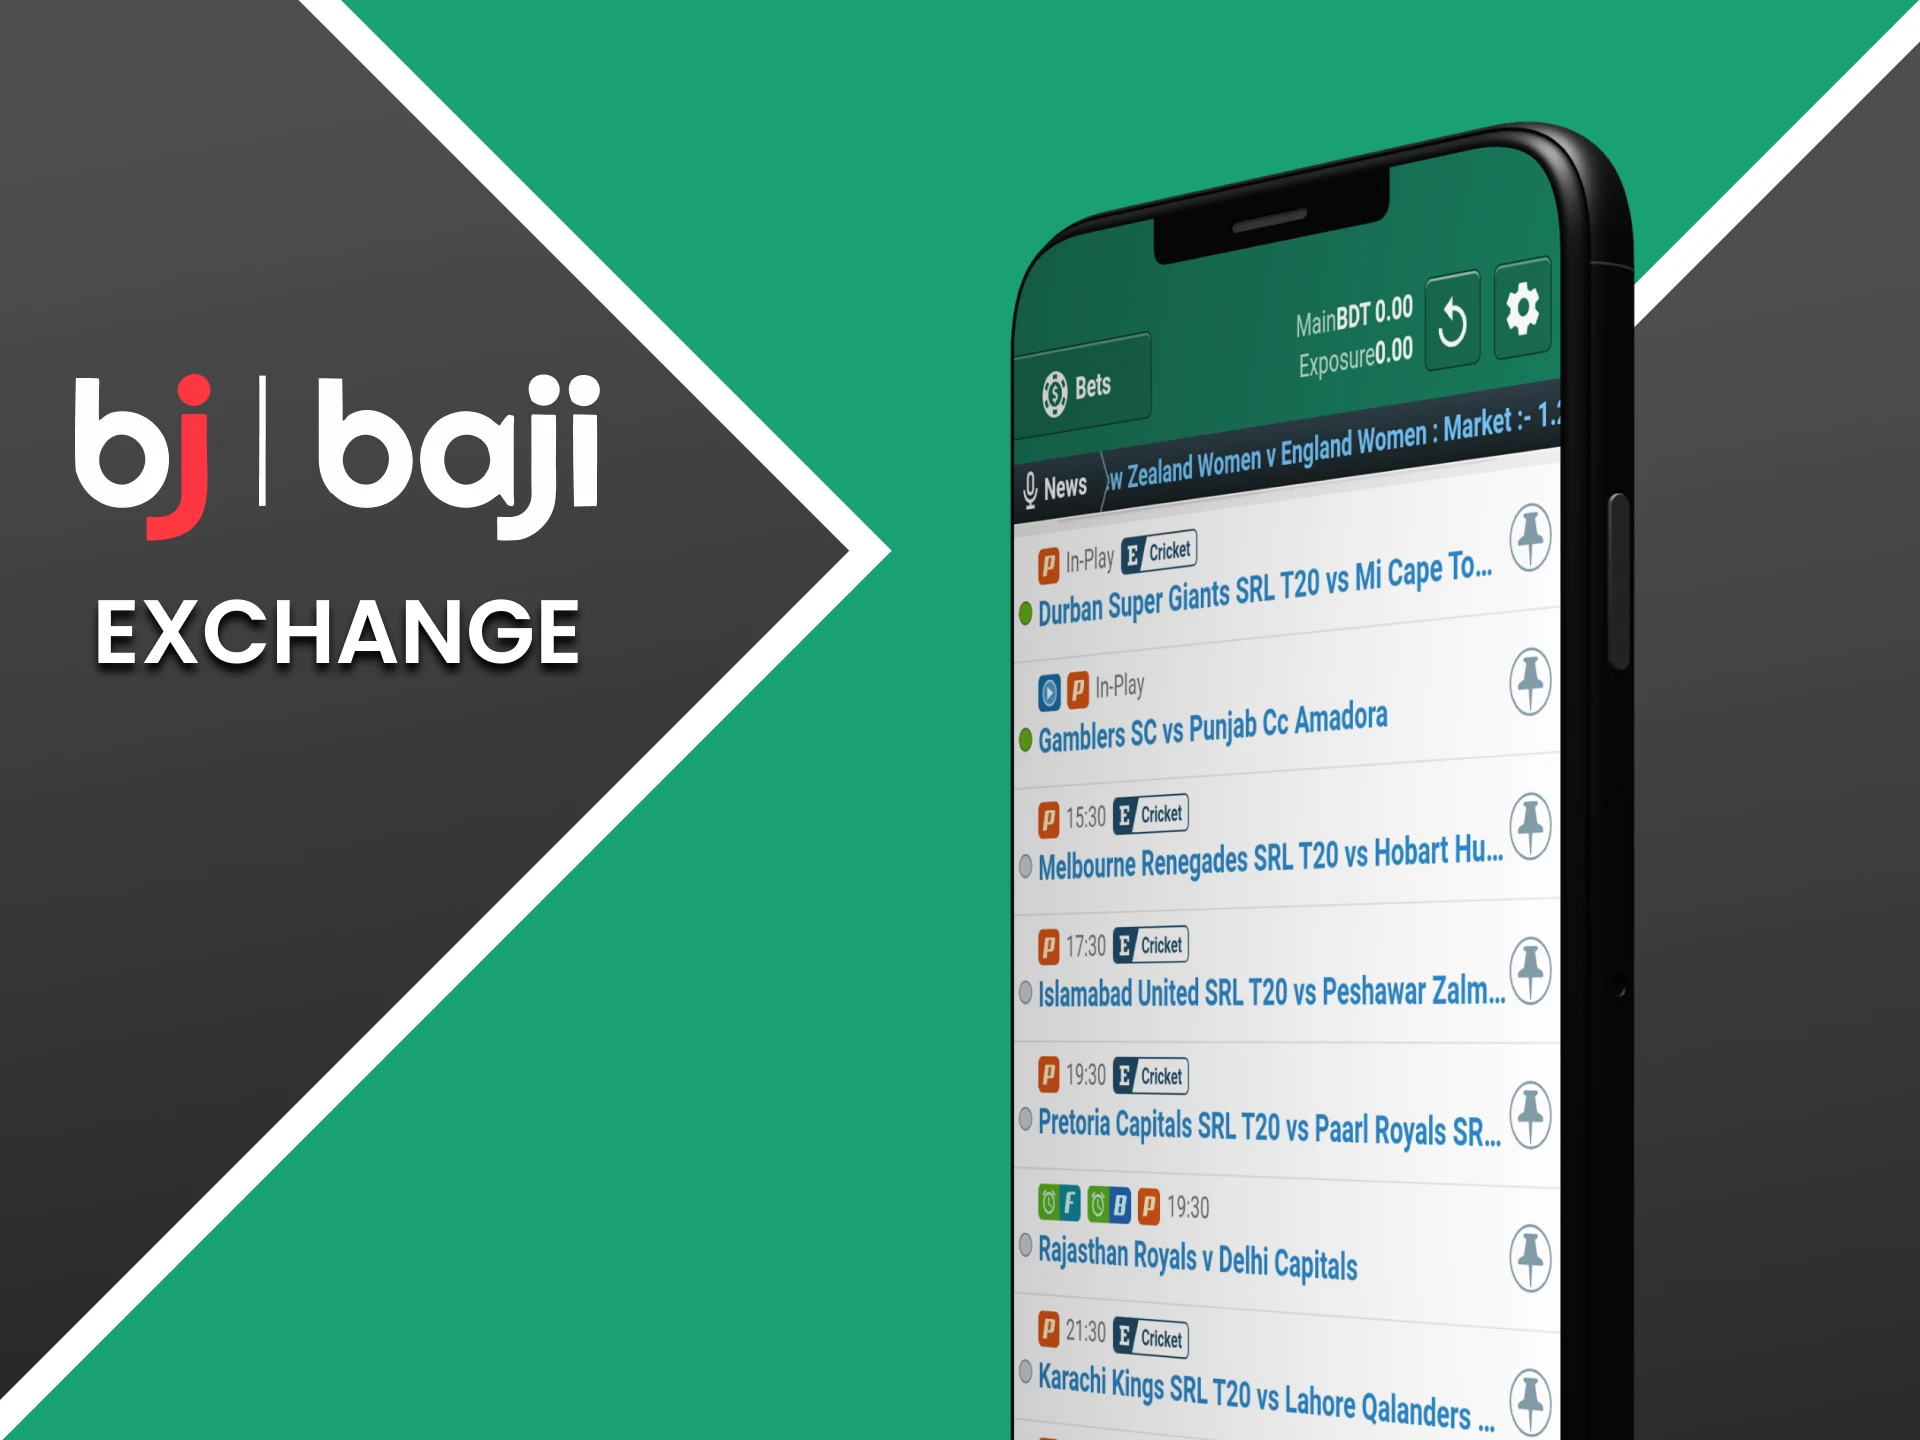 The Baji app has an Exchange section.